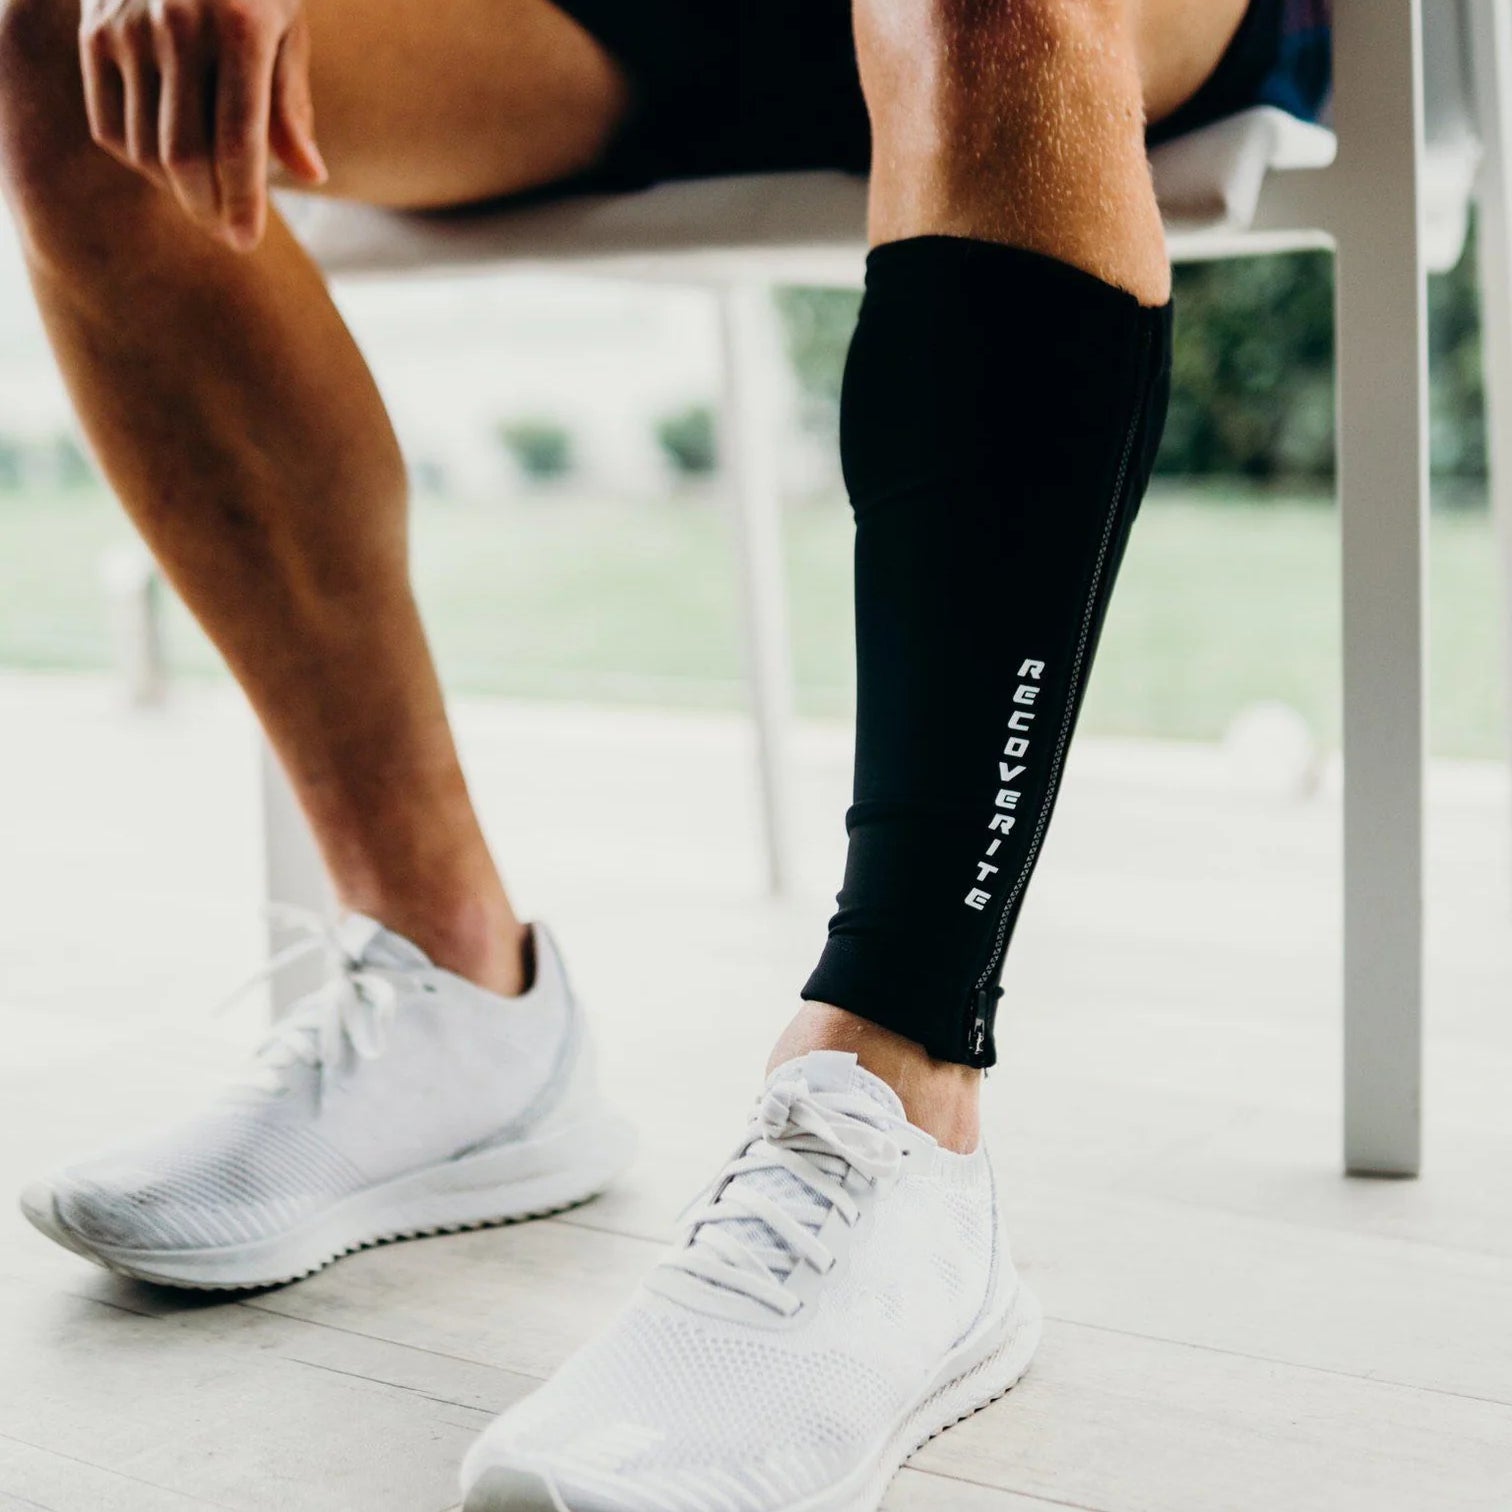 The Benefits & Features Of Wearing Recoverite Calf Compression Sleeves While Training